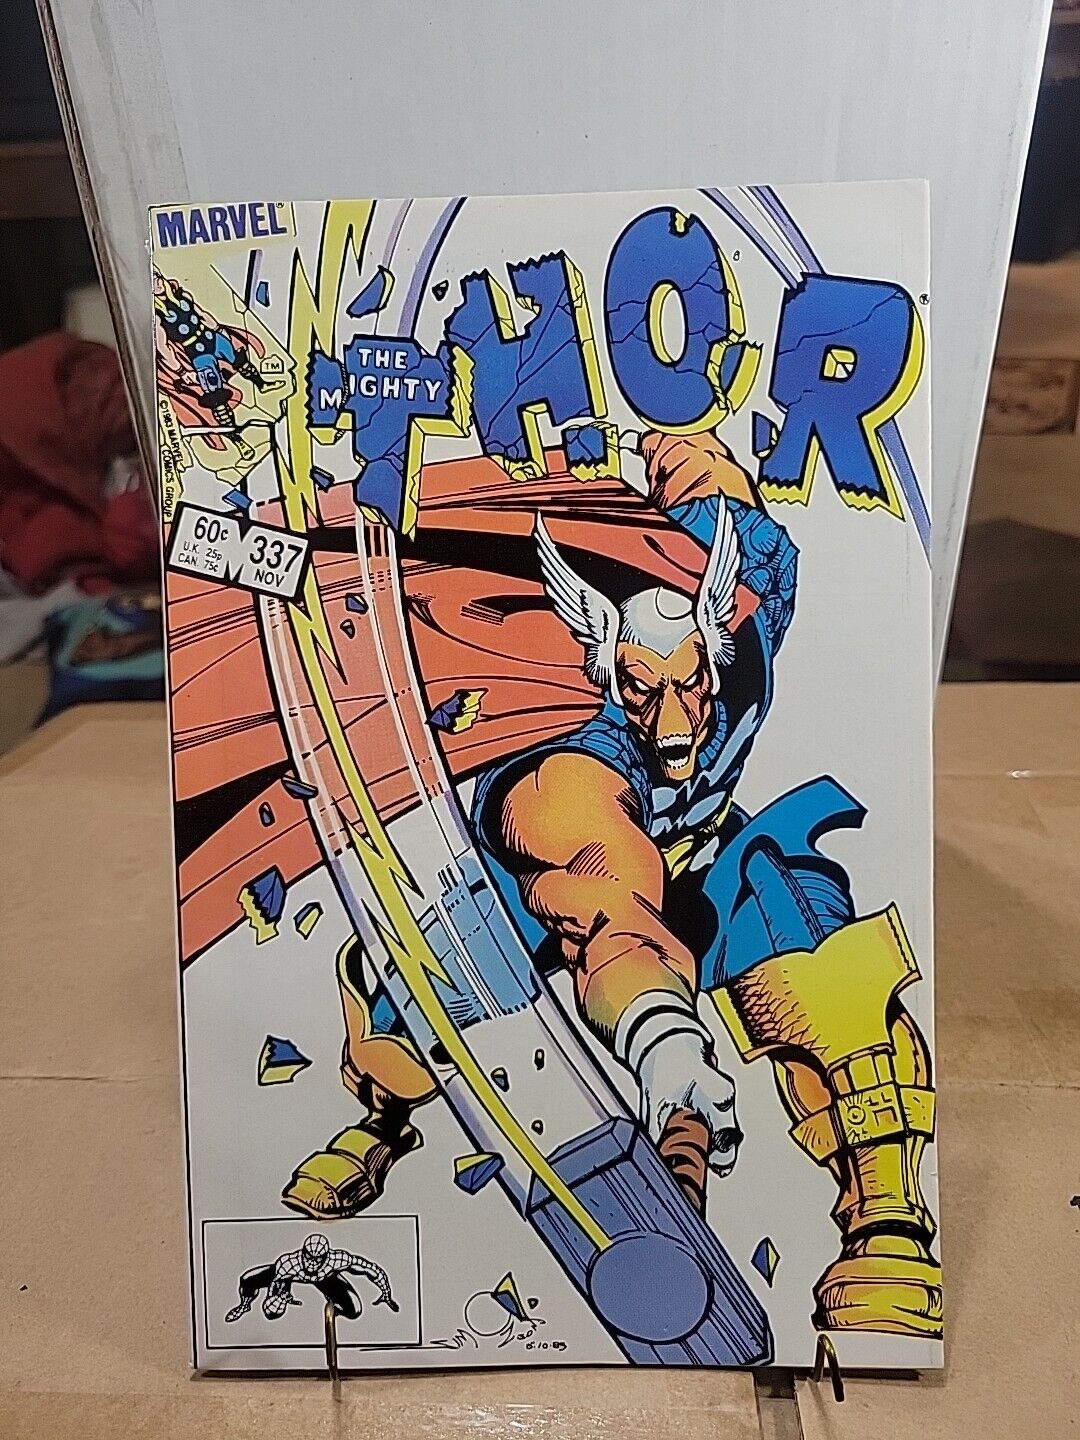 THOR #337 FIRST APPEARANCE OF BETA RAY BILL MARVEL COMICS 1ST PRINT